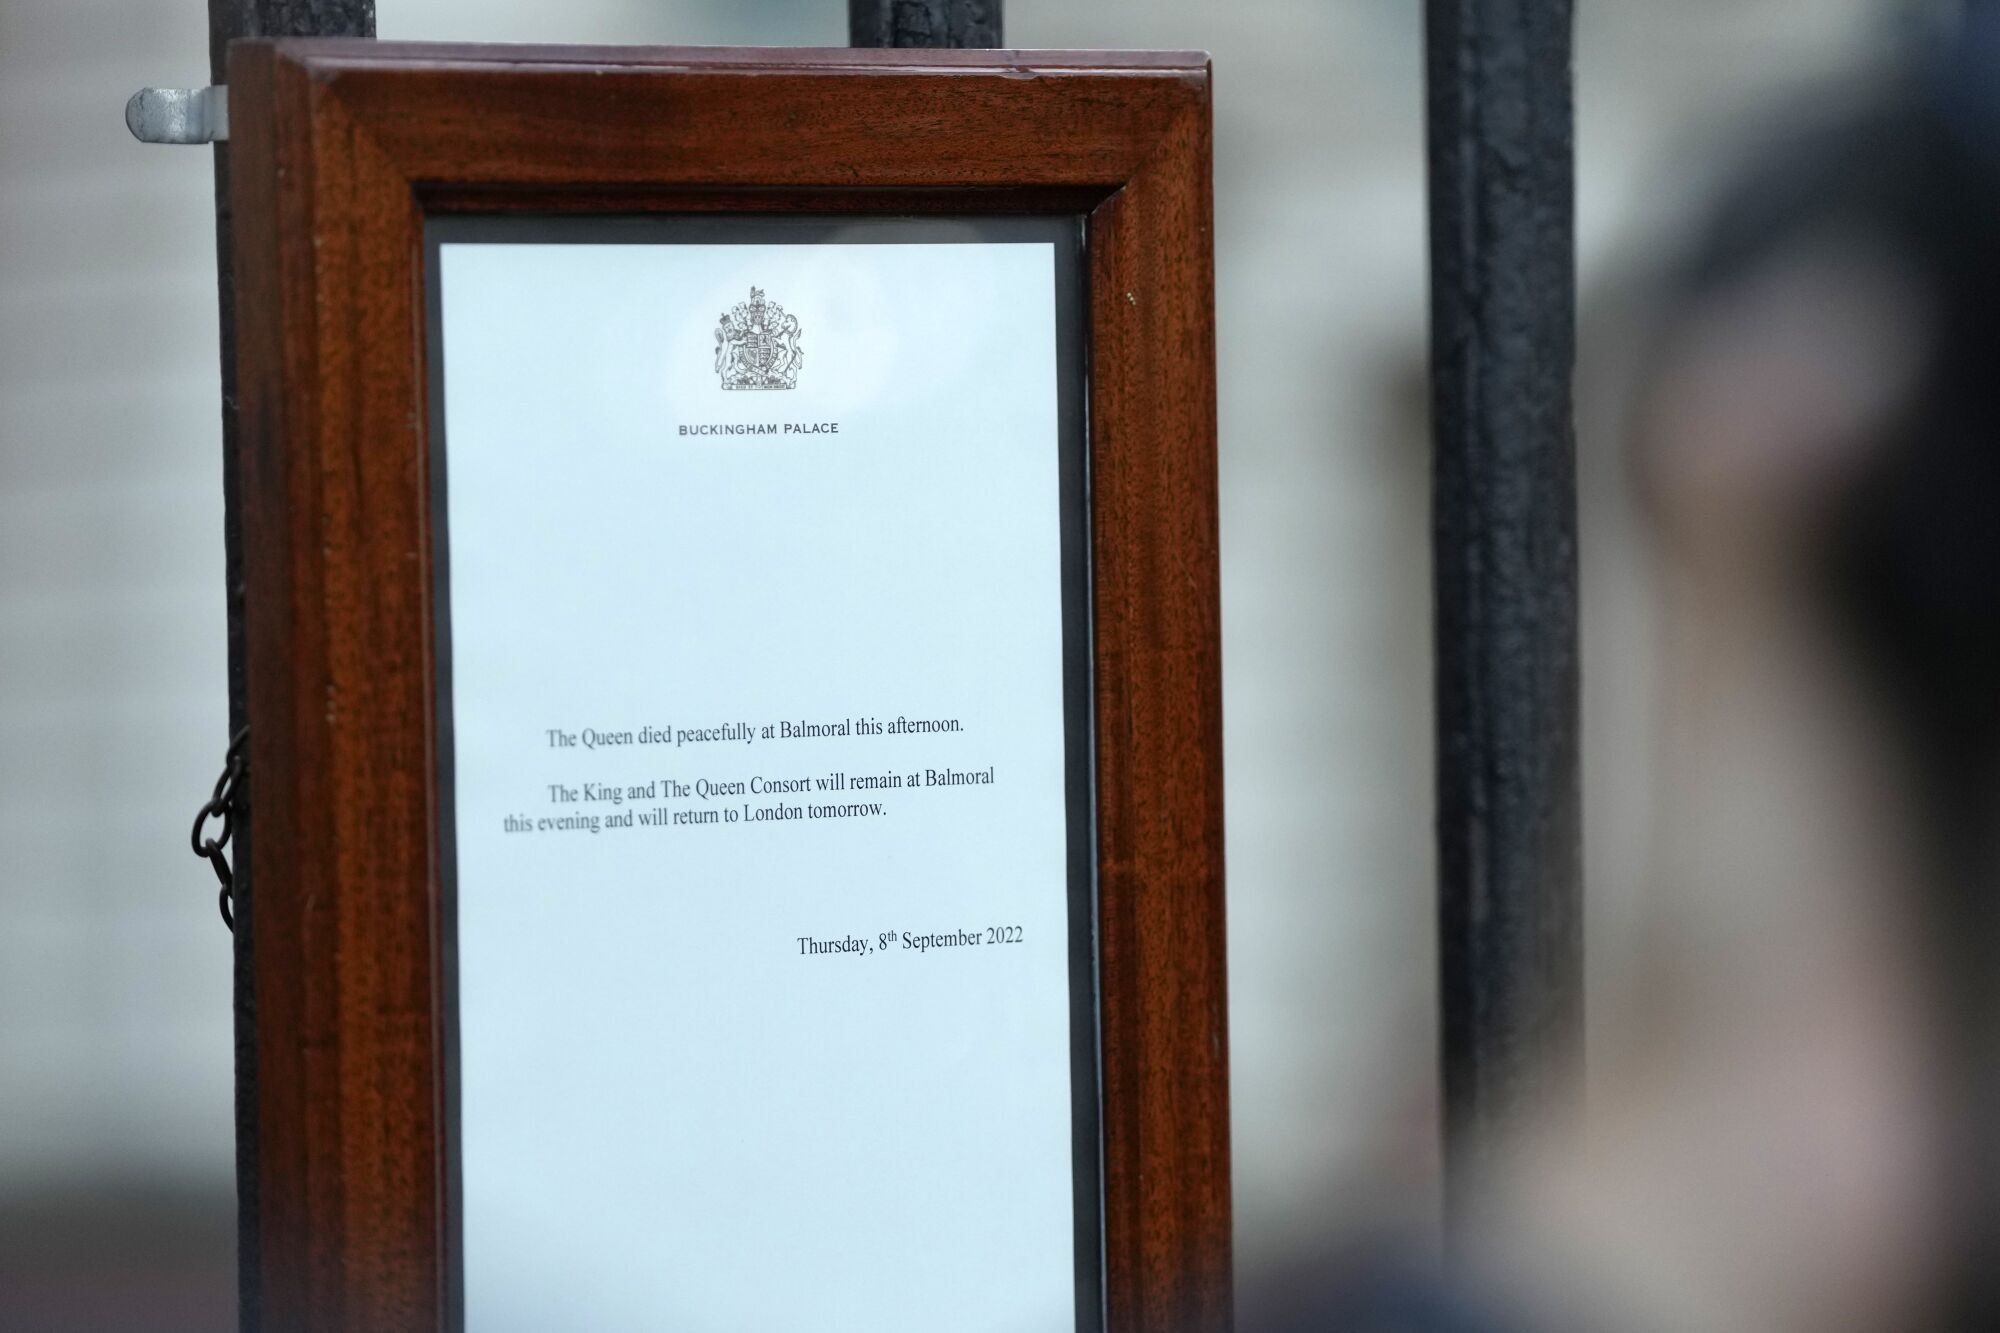 An announcement regarding the death of Britain's Queen Elizabeth II is displayed on the gates of Buckingham Palace in London.